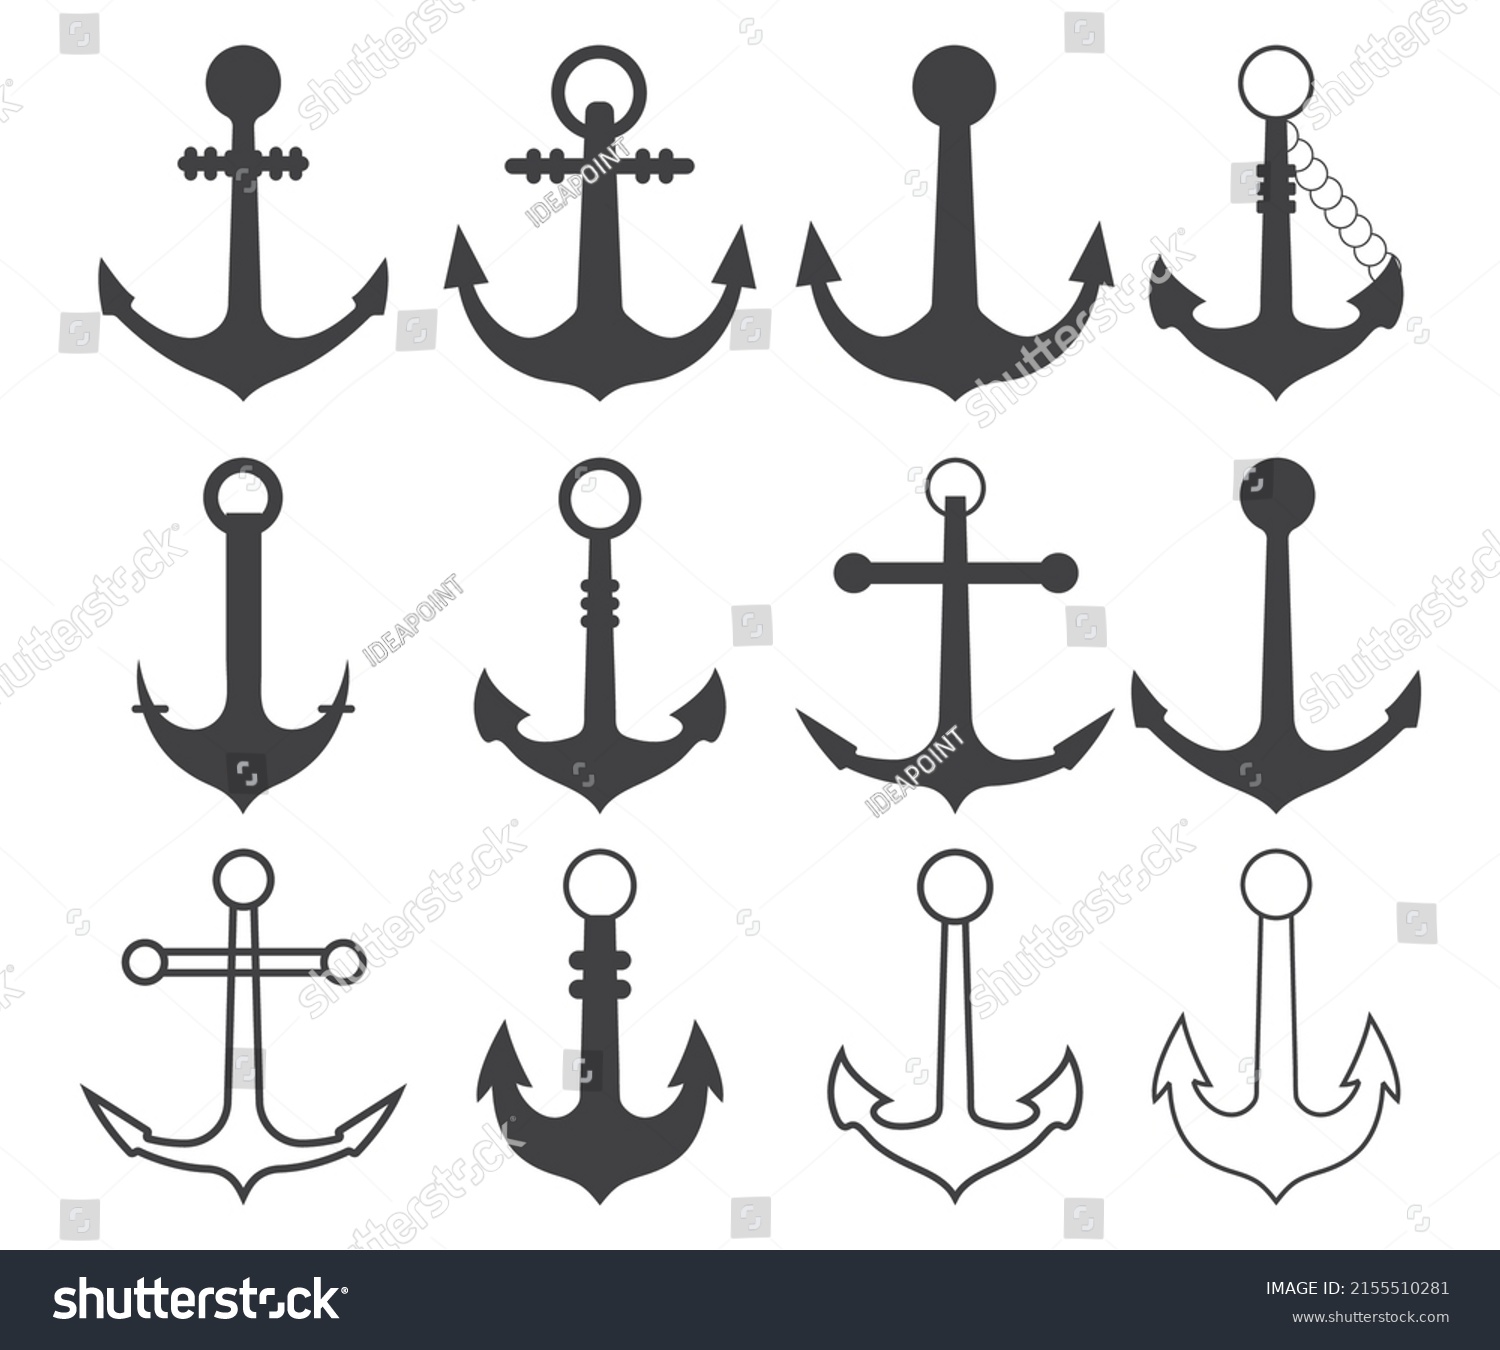 SVG of Anchor SVG, Anchor Vector, Silhouette svg